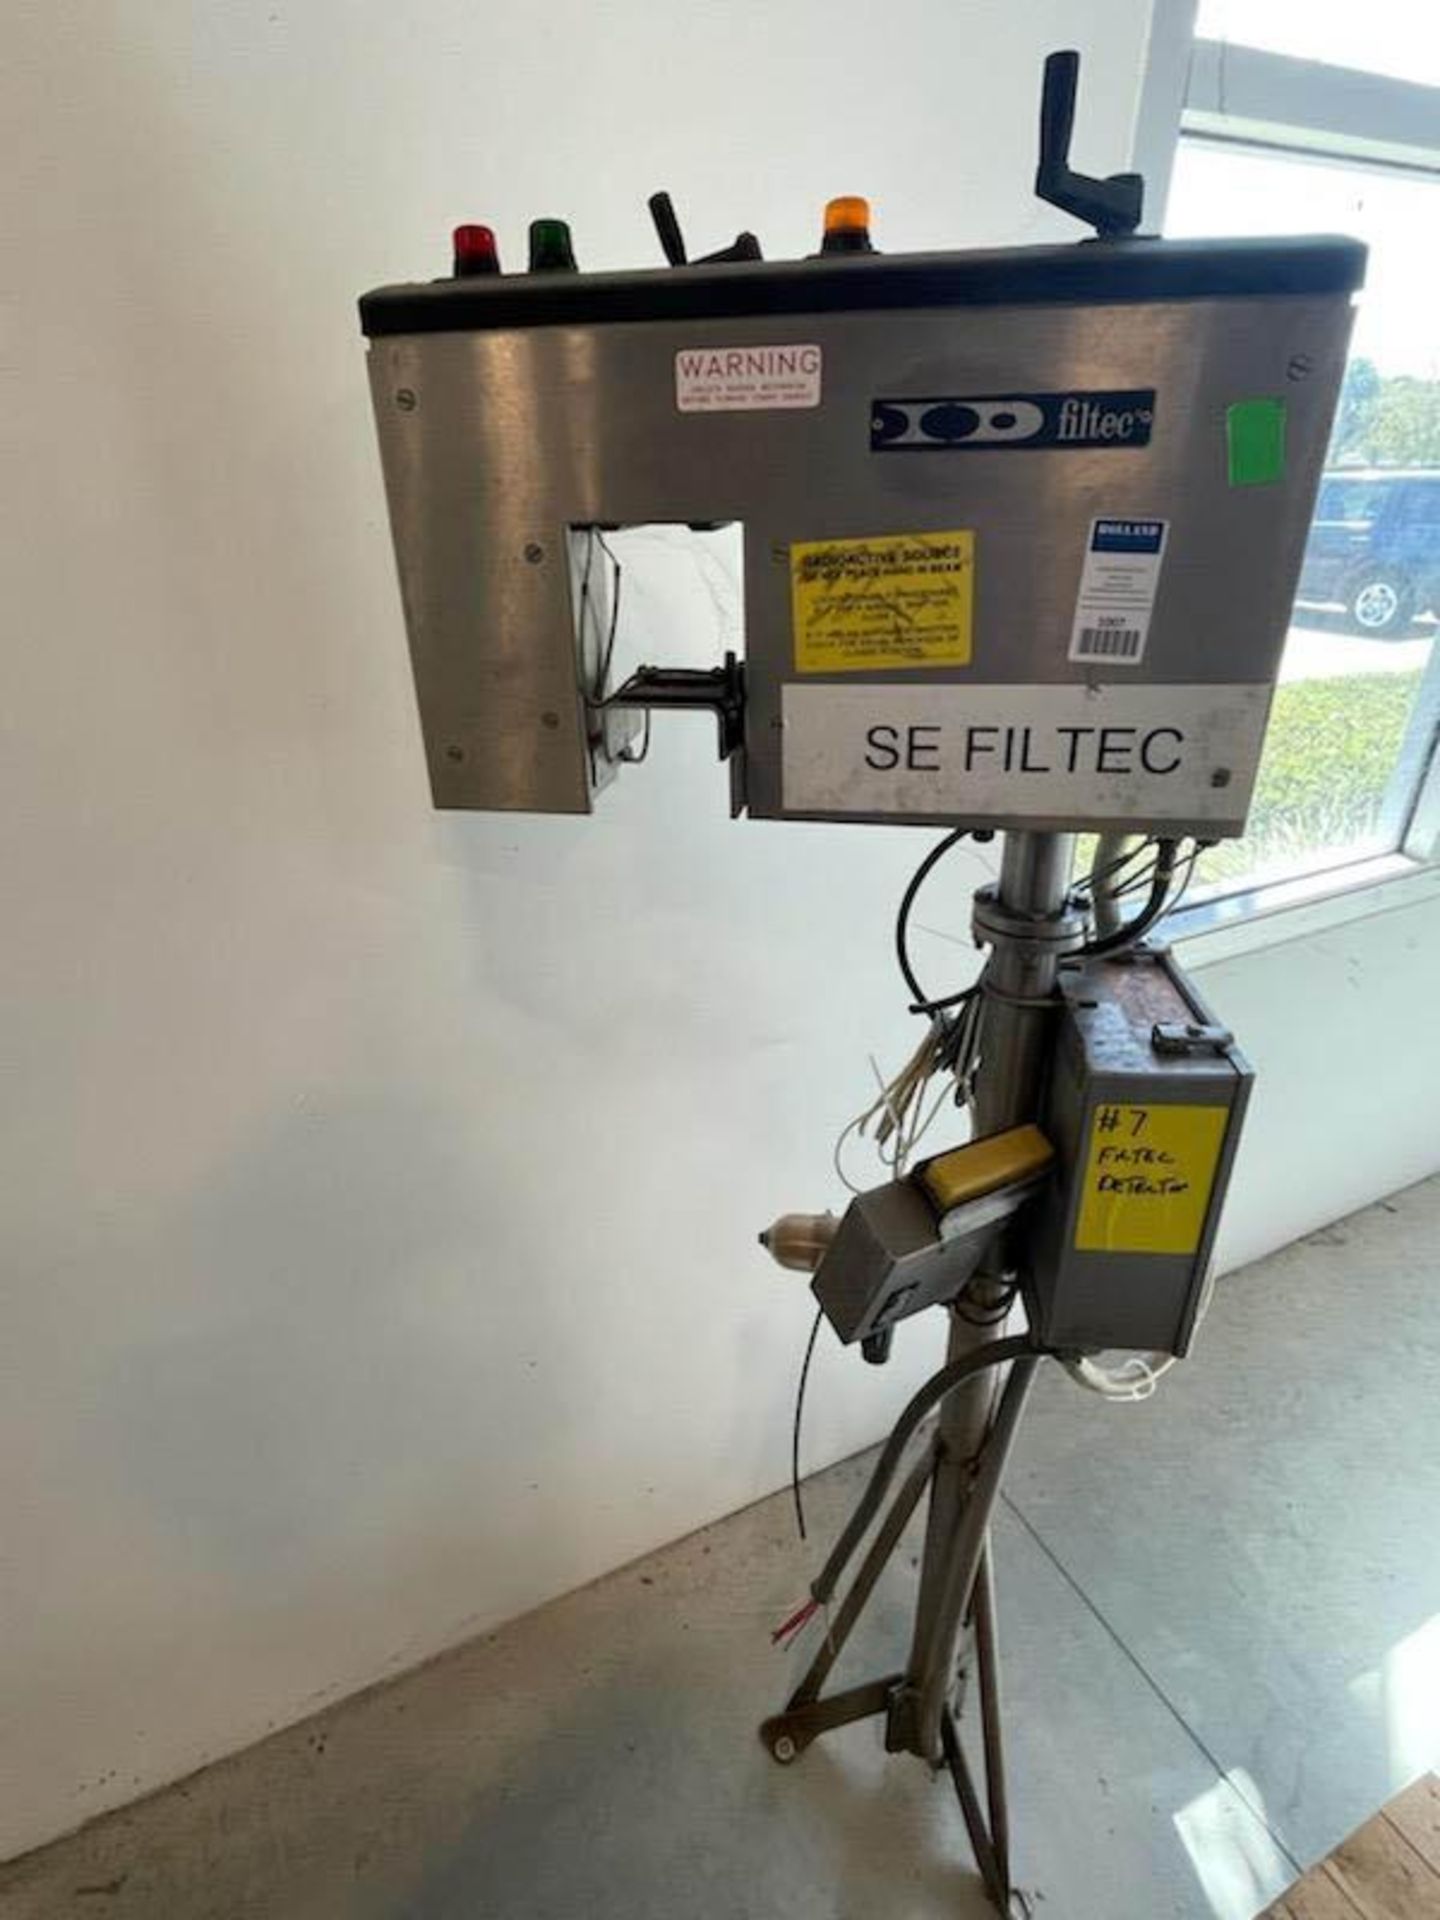 Filtec FT-50 Inspector Unit, S/N: 113259 - Located At Pembroke Pines, FL Facility